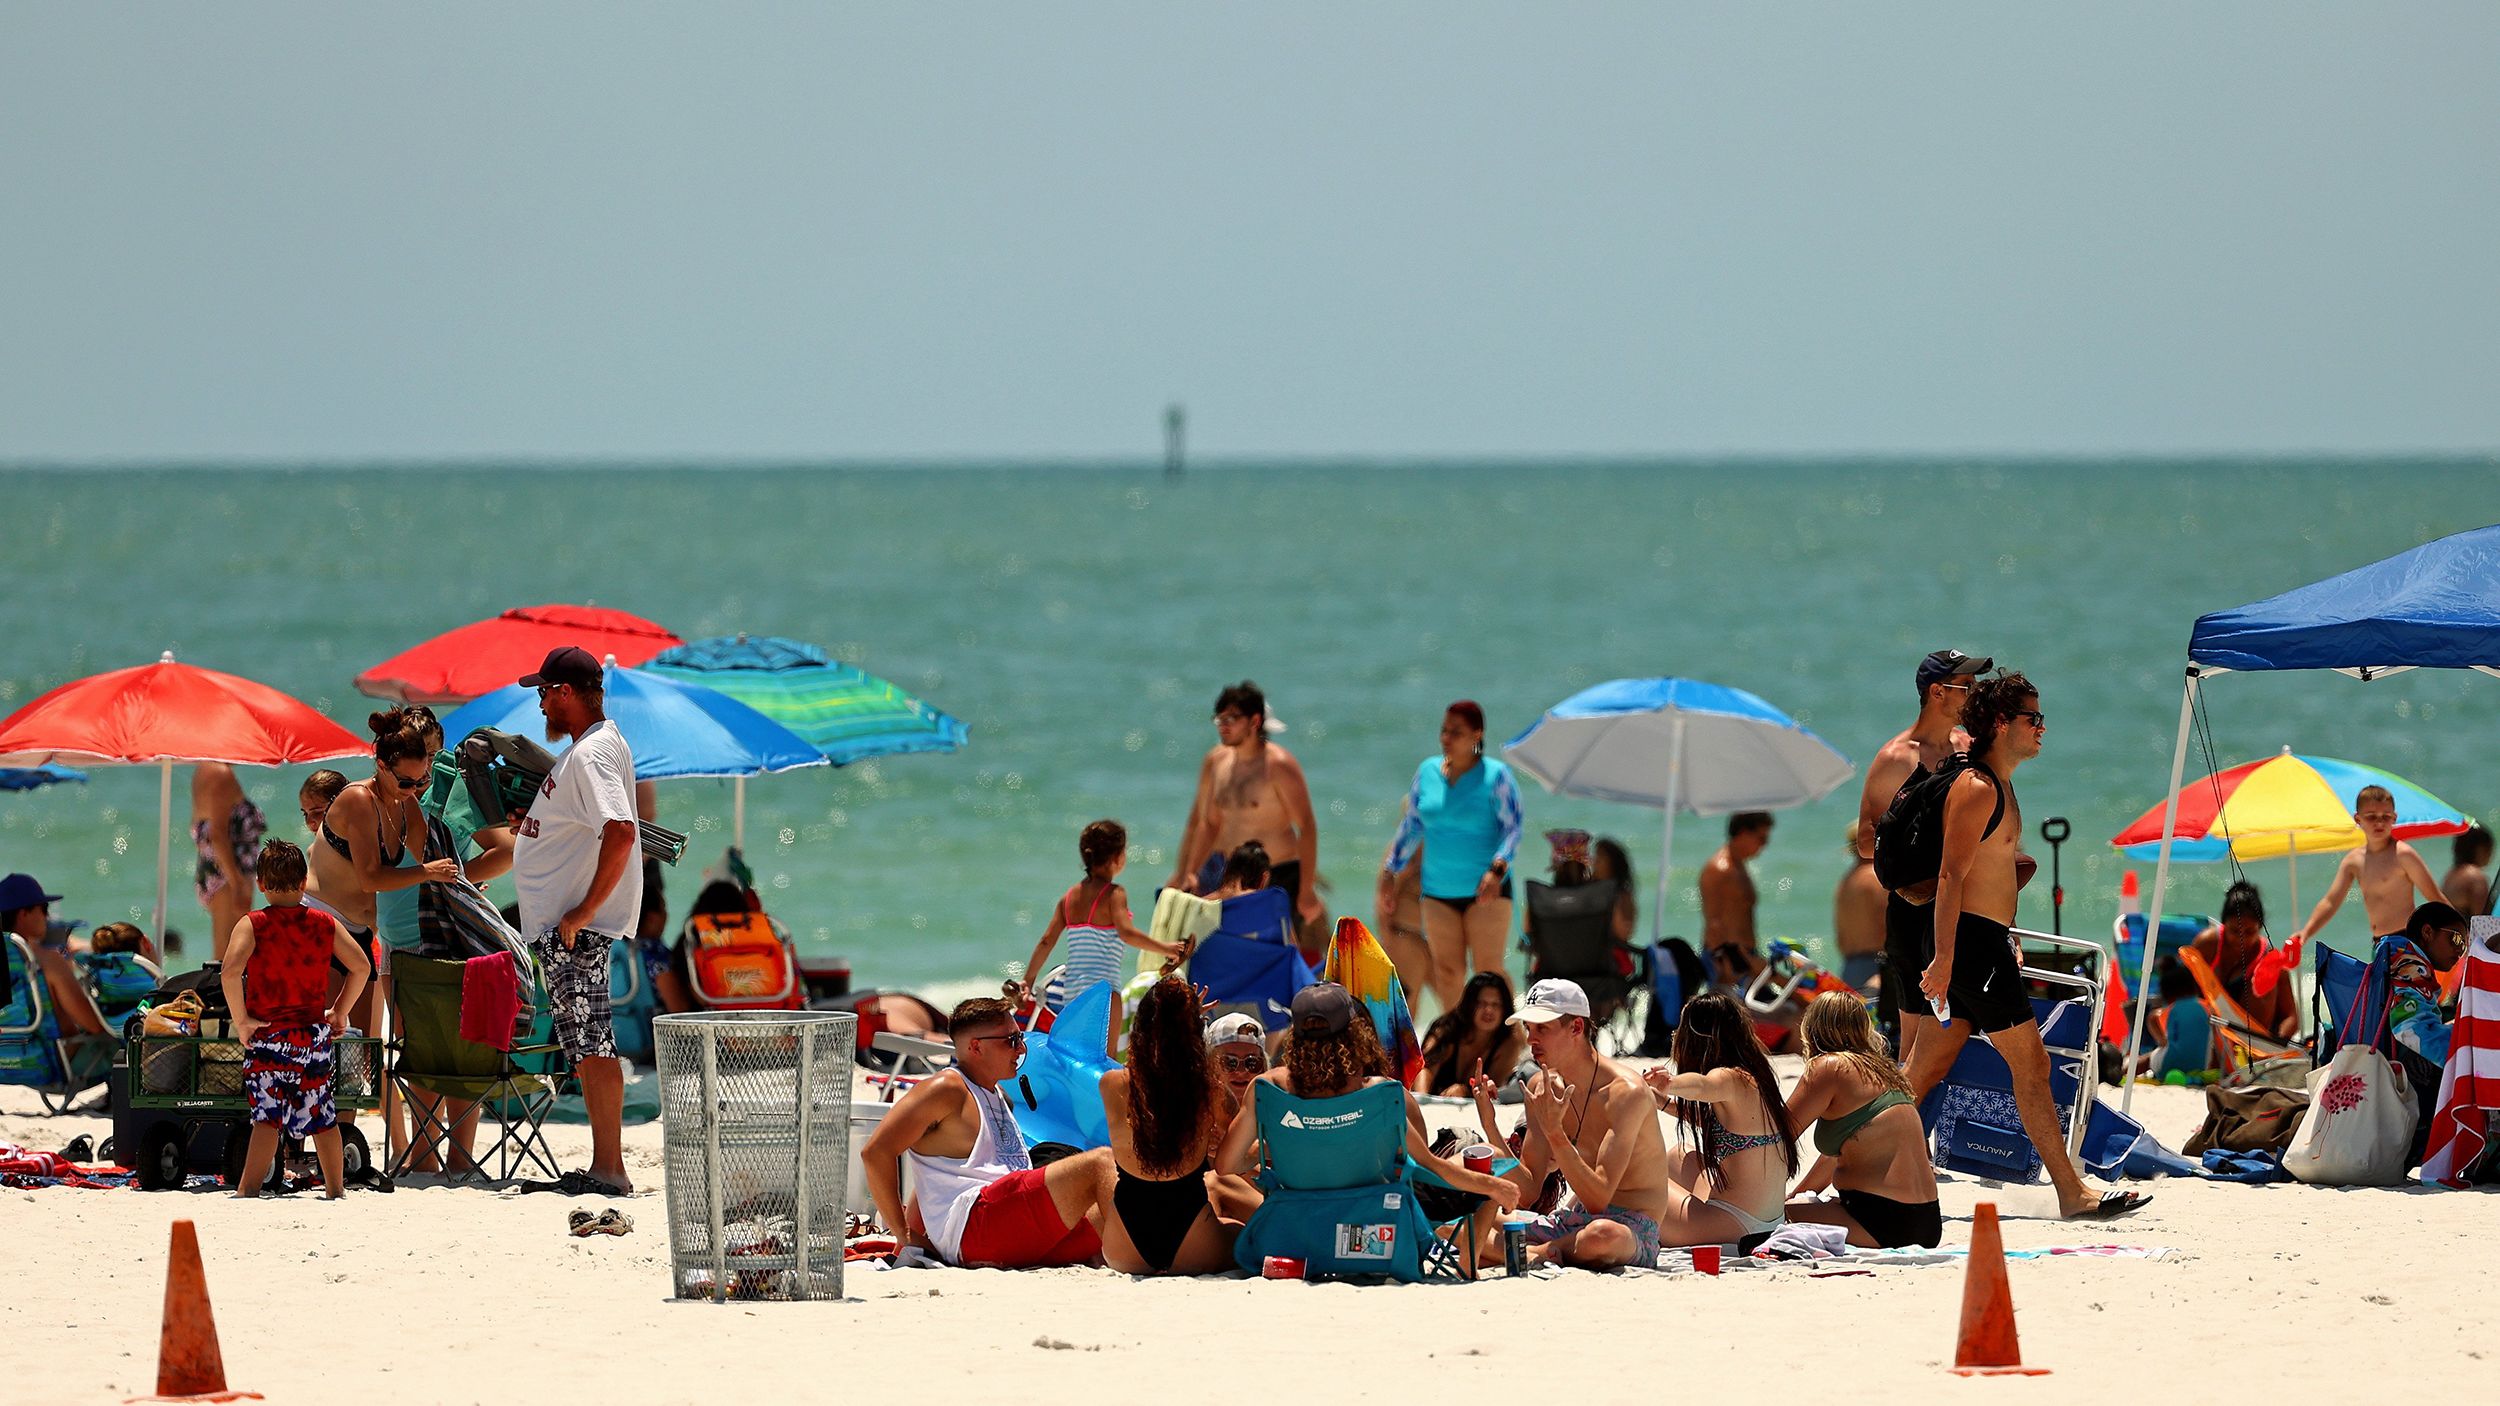 People visit Florida's Clearwater Beach on May 20. Florida opened its beaches as part of Phase One of its reopening.